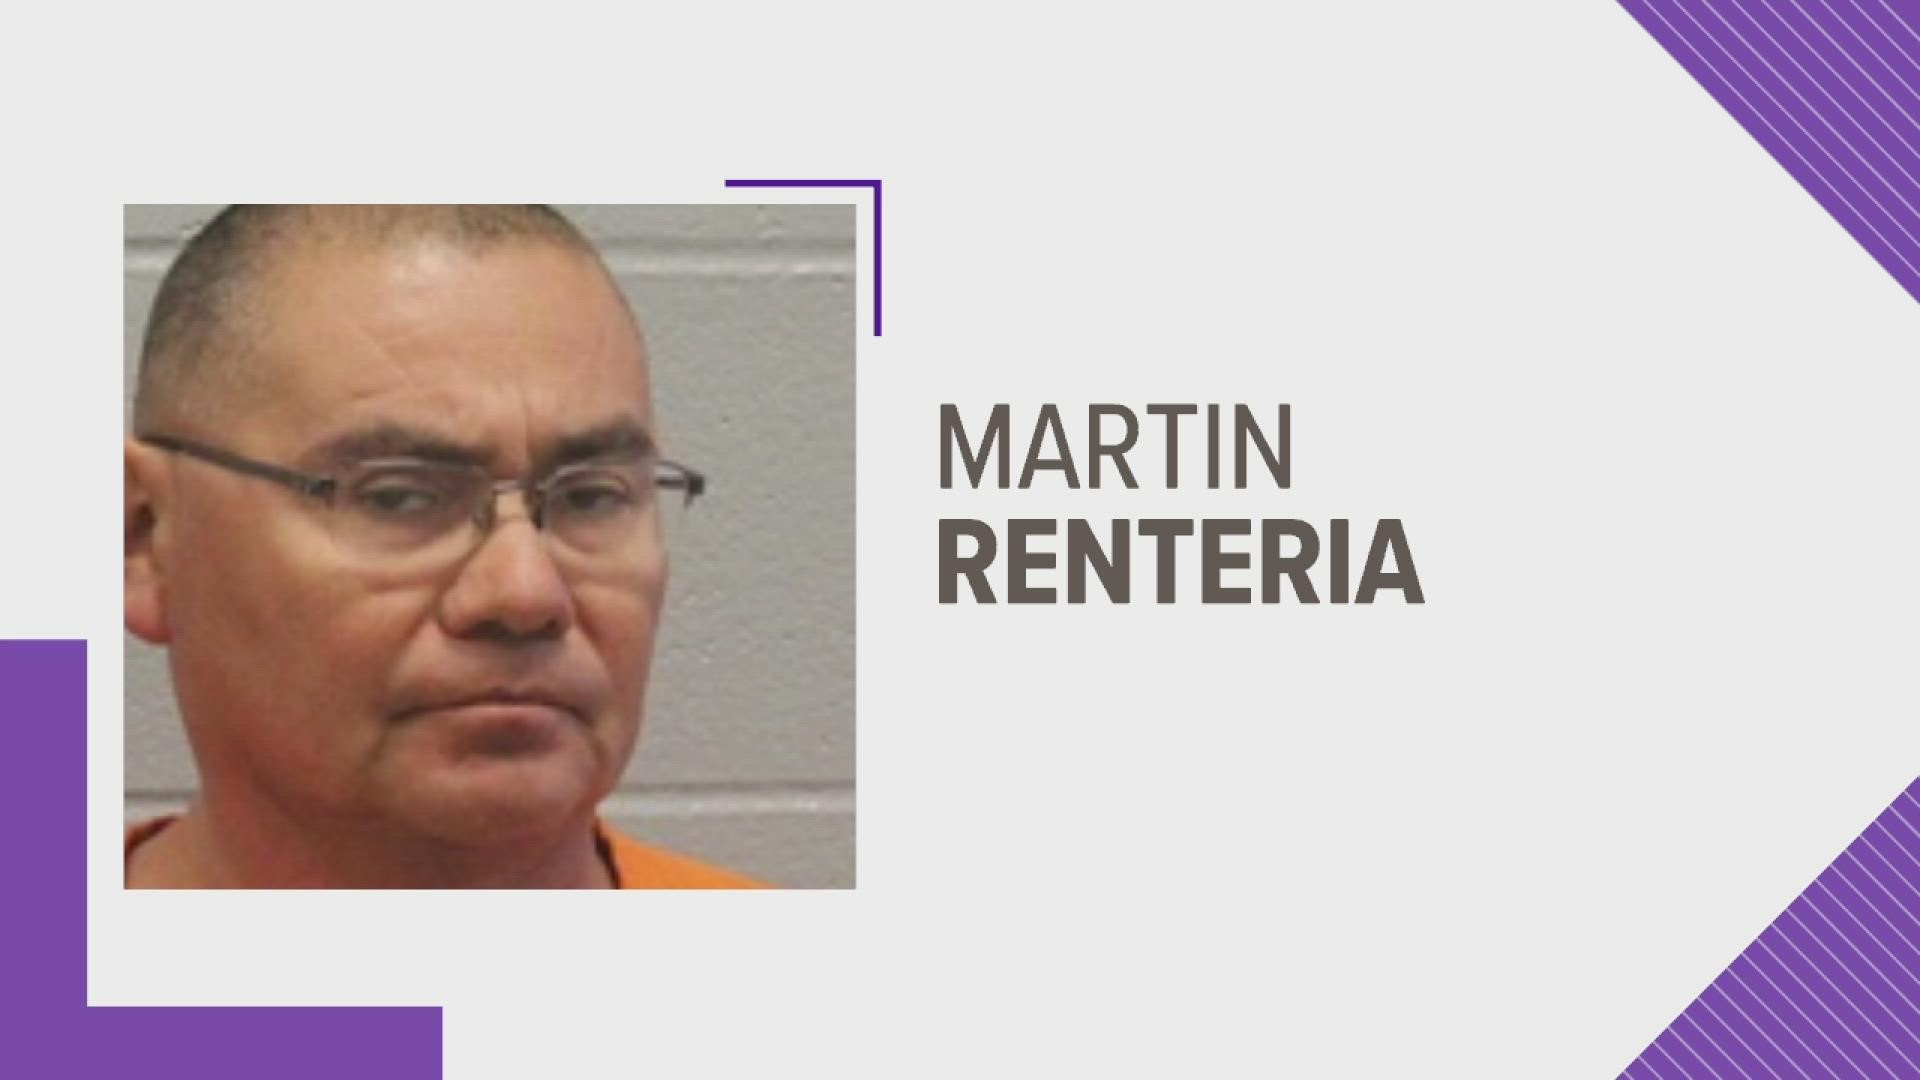 According to the DOJ, Martin Renteria enticed the child into sexual acts multiple times in exchange for expensive gifts.